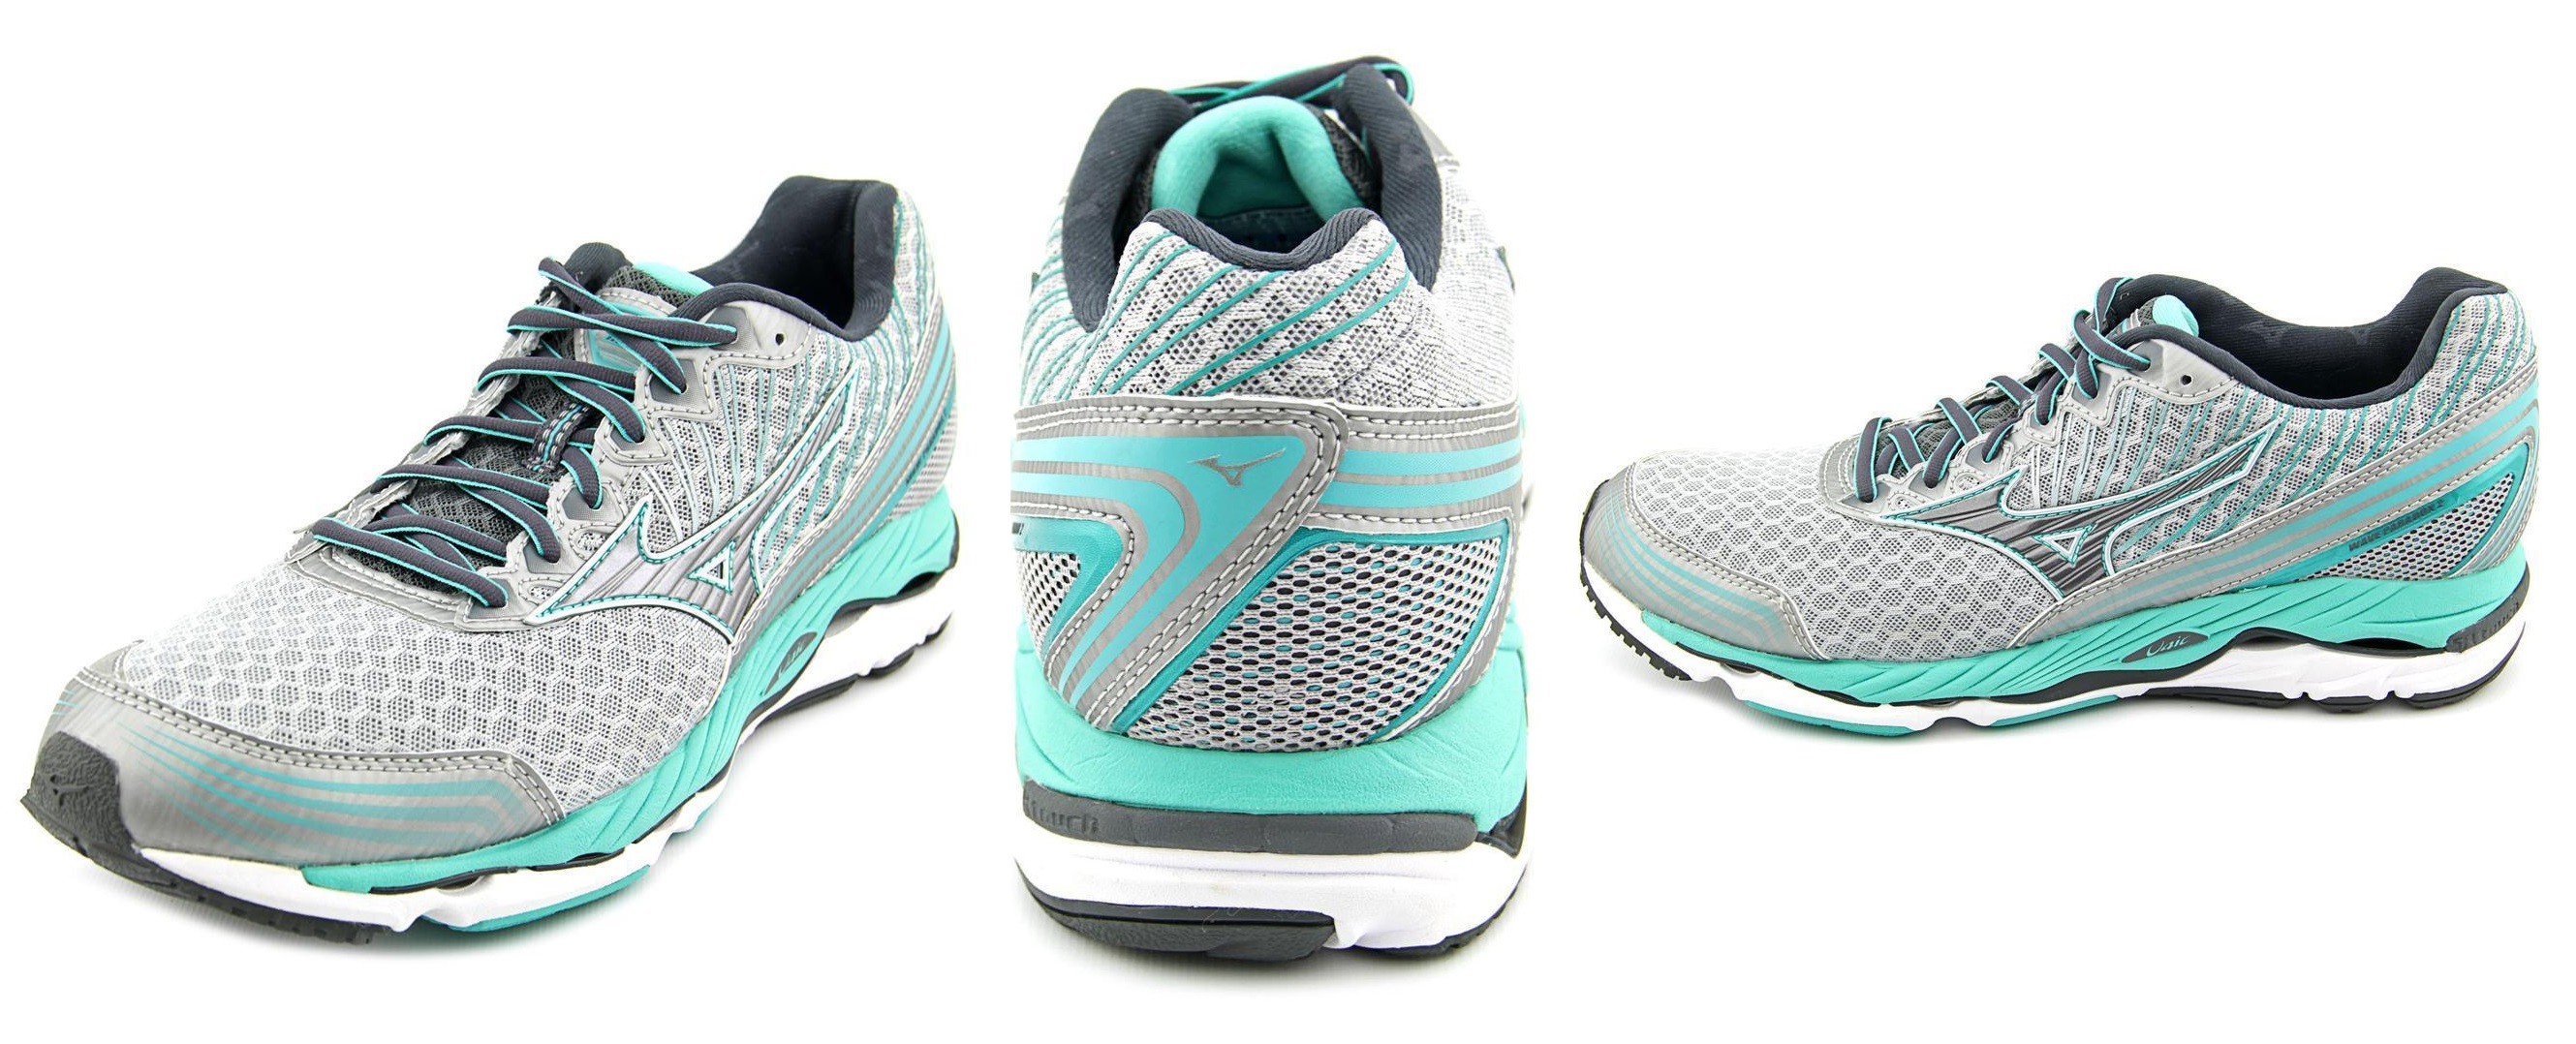 Mizuno Wave Paradox 2 Women’s Running Shoes Only $34.99!